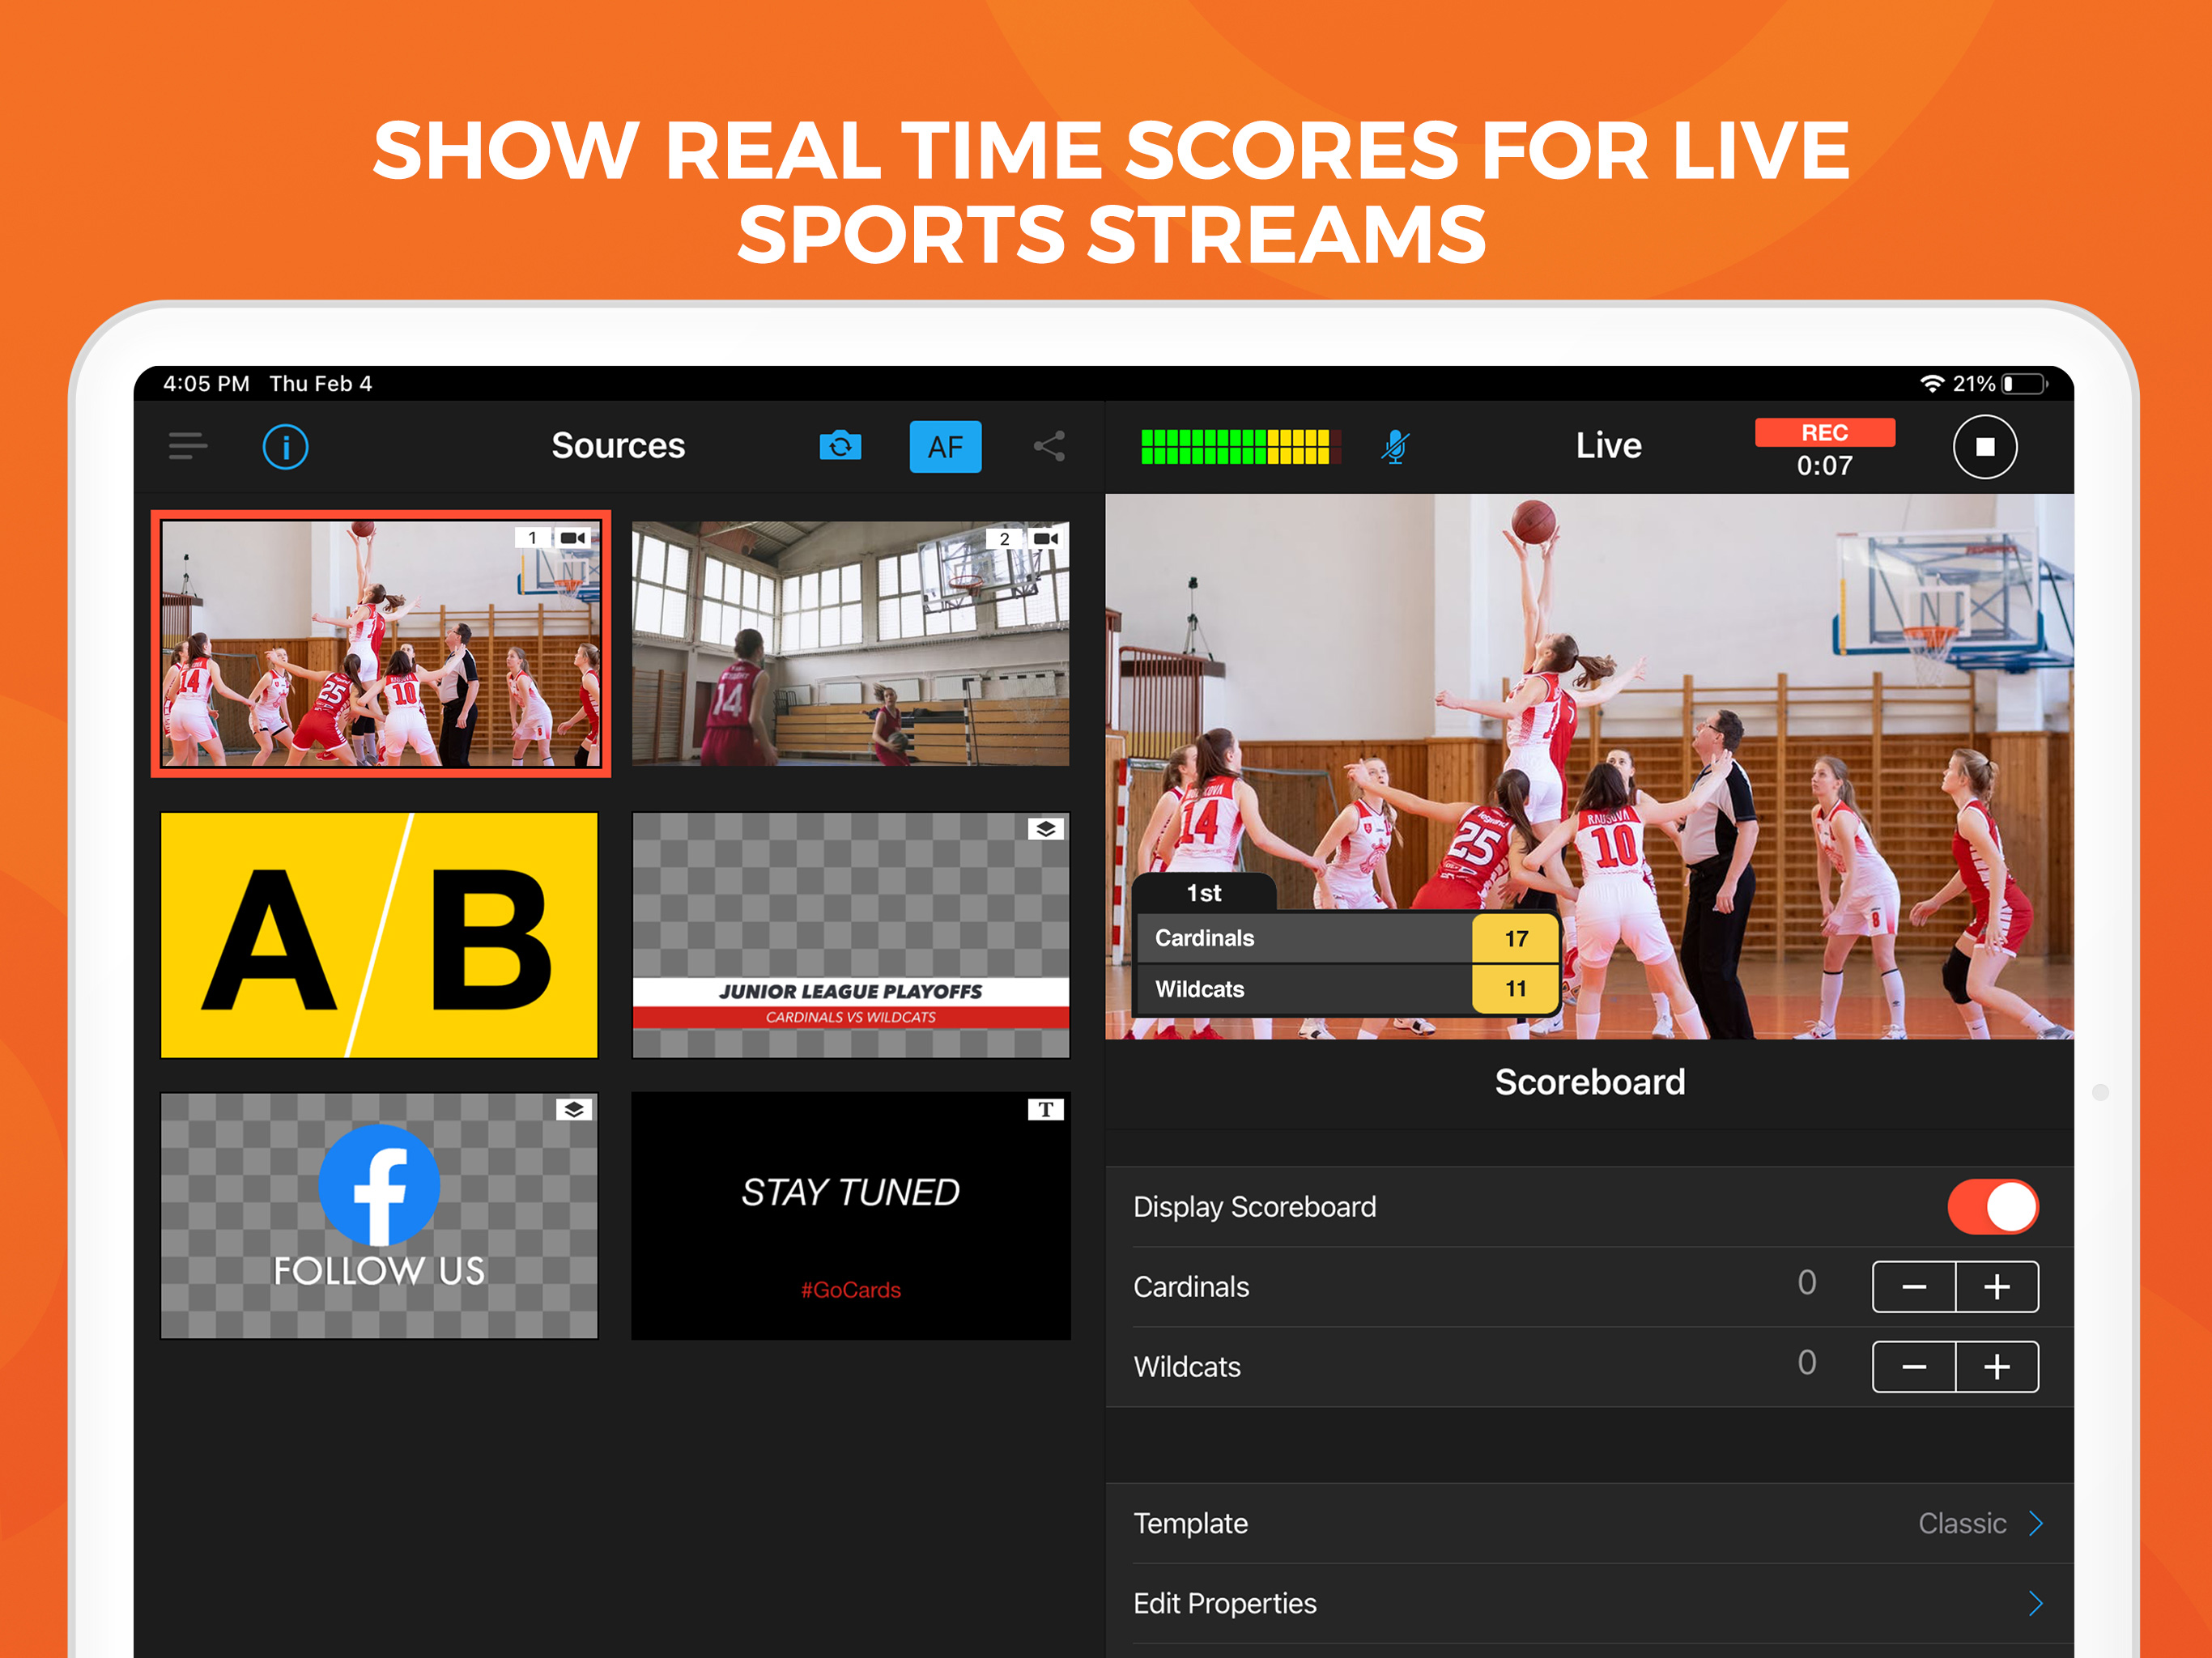 Show real-time scores for live sports streams!